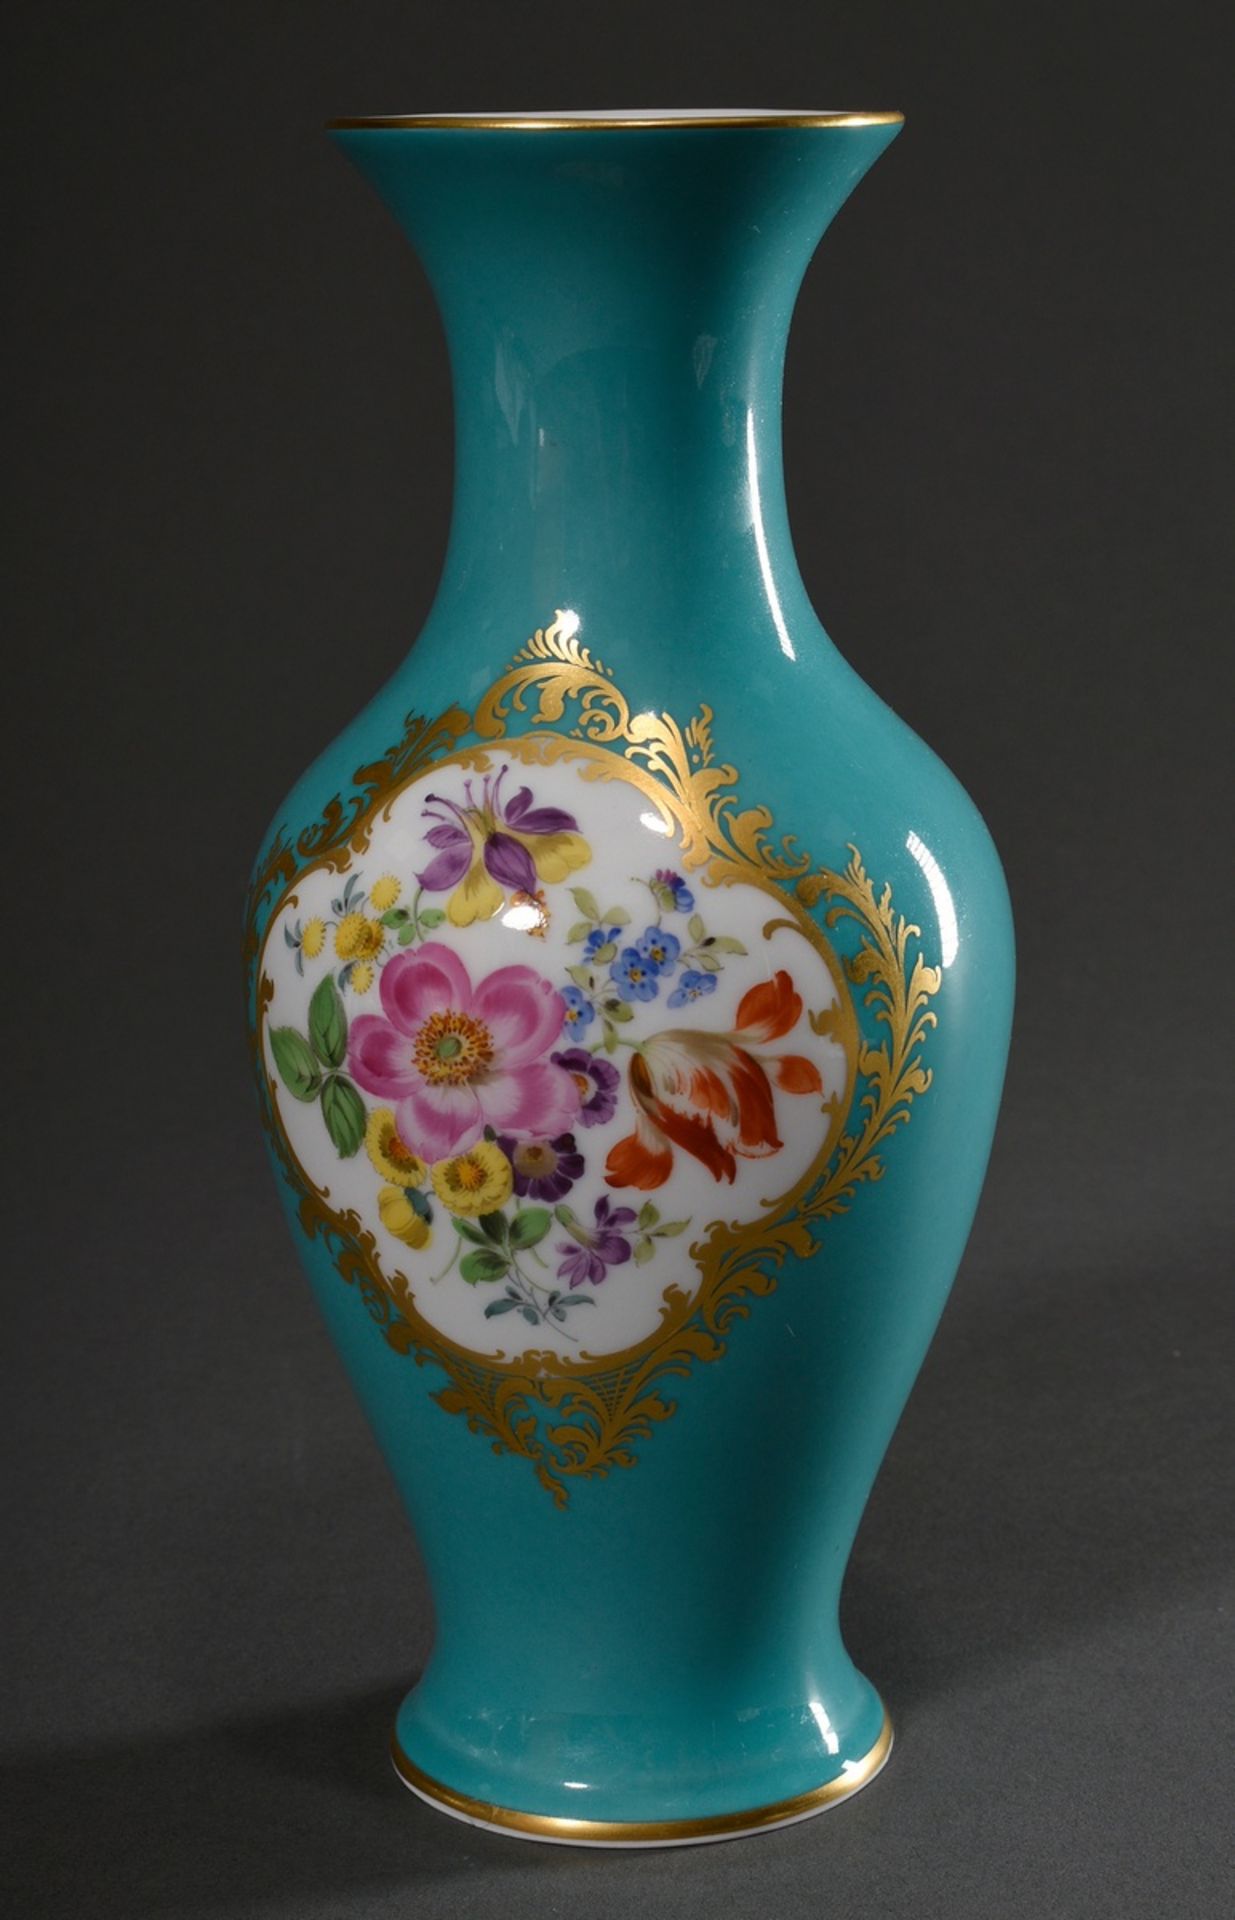 Meissen vase with polychrome painting "Bouquet of flowers" in gold cartouche on turquoise backgroun